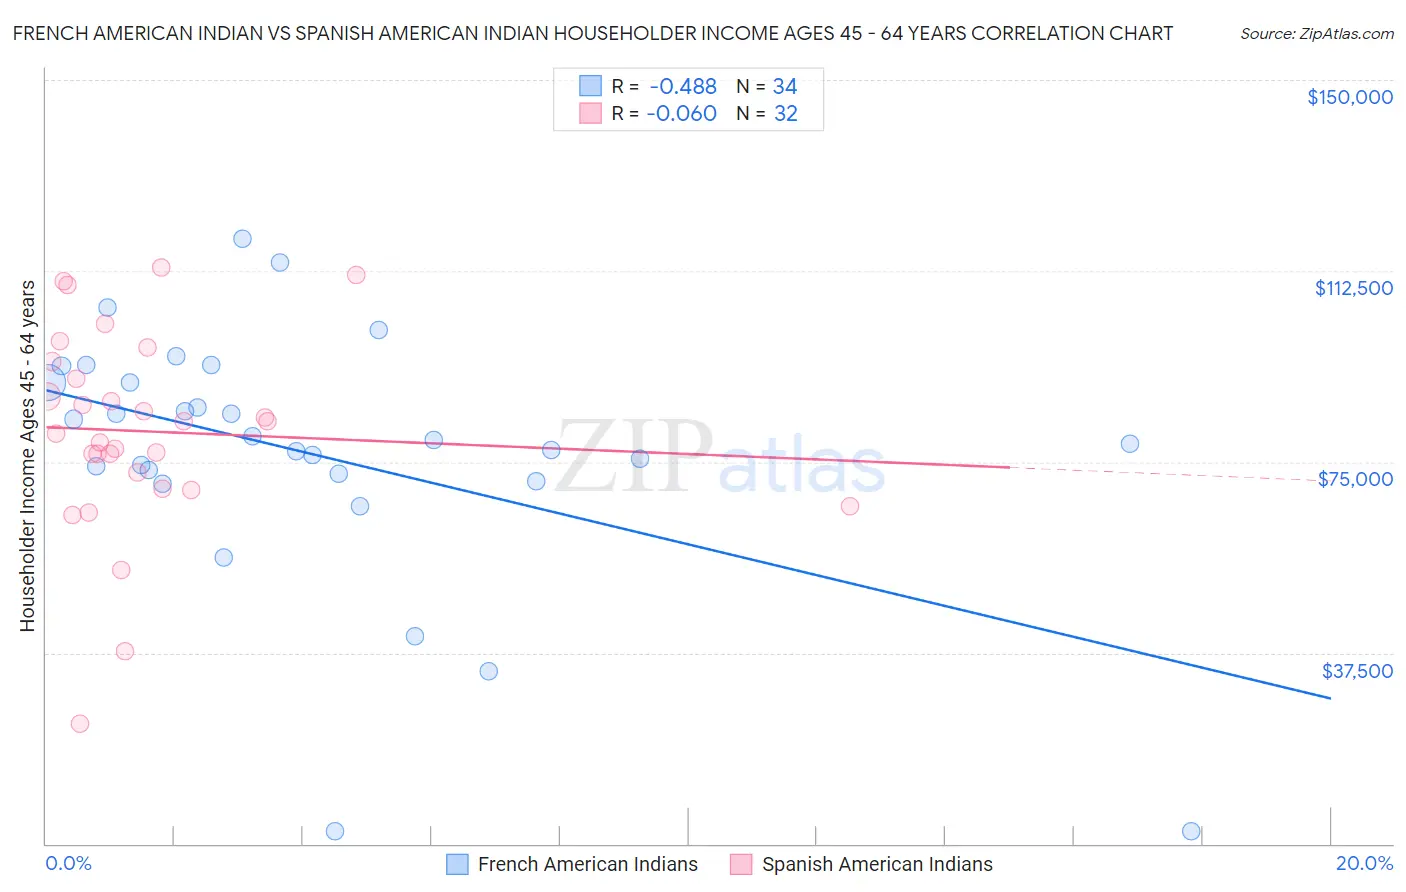 French American Indian vs Spanish American Indian Householder Income Ages 45 - 64 years